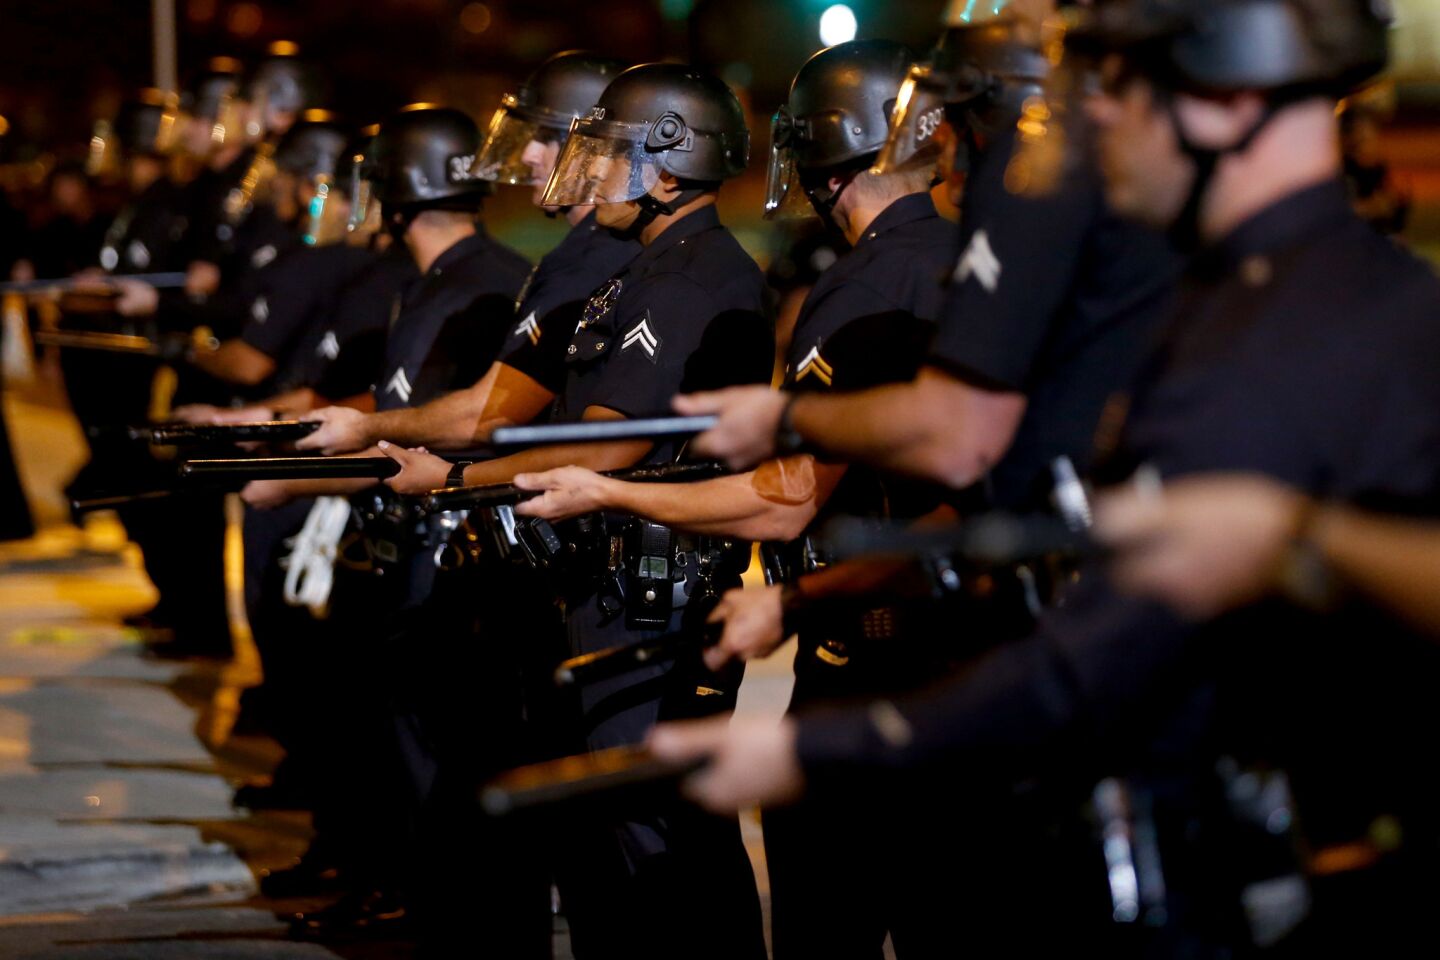 Police disperse the crowd along Western Avenue and 107th Street in Los Angeles, Calif., on Sunday night. Four activists were arrested by LAPD.